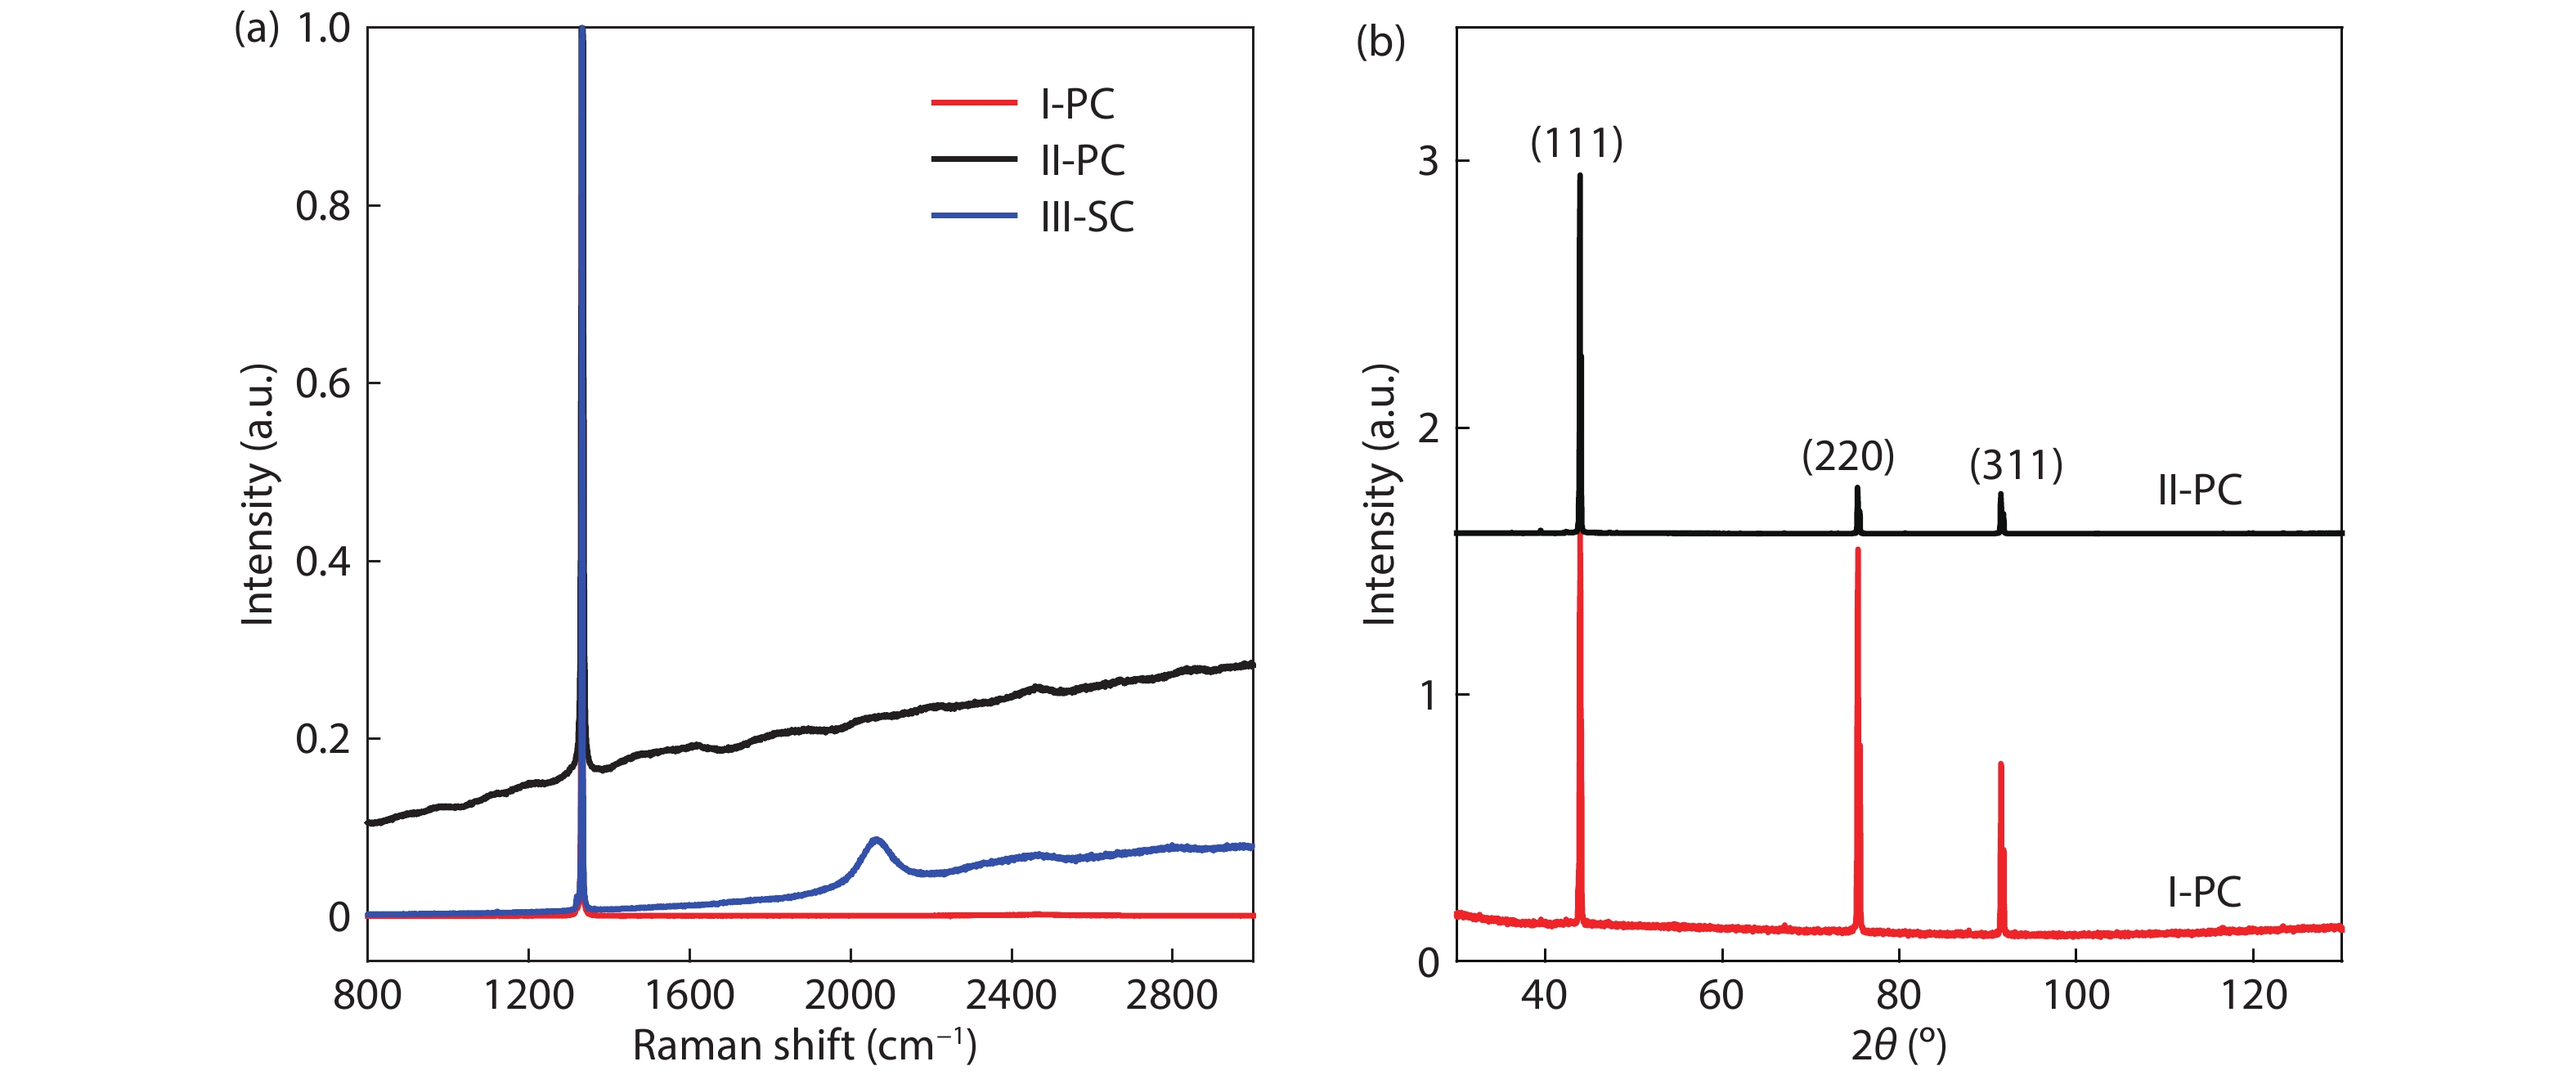 (Color online) (a) Raman spectra of the I-PC, II-PC, and III-SC diamond samples. (b) XRD pattern of I-PC, and II-PC diamond samples.